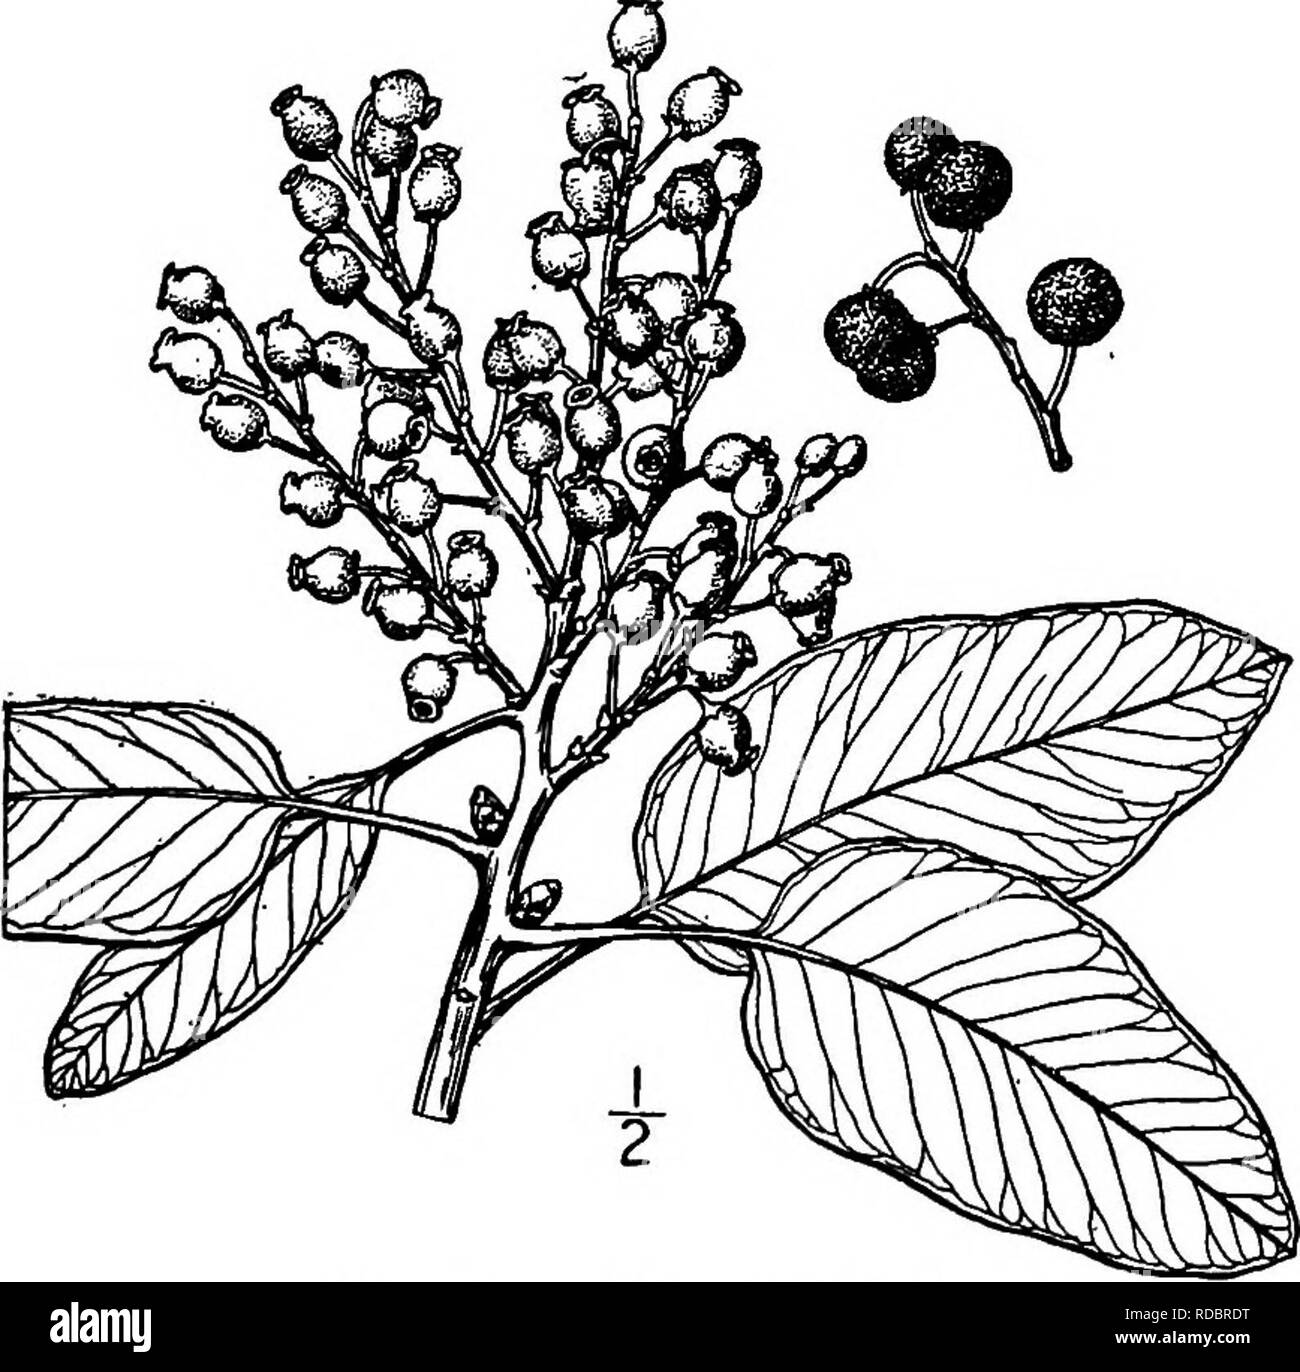 . North American trees : being descriptions and illustrations of the trees growing independently of cultivation in North America, north of Mexico and the West Indies . Trees. Fig. 693. — Madrona. gravity about 0.70; it is used to a slight extent for furniture and largely burned for charcoal, for use in the manufacture of gunpowder. The astringent bark has been used in tanning and in medicine. It is the handsomest and largest member of the Heath family, at least in North America. 2. TEXAN MADRONA —Arbutus texana Bucyey Arbutus xalapensis S. Watson, not Humboldt, Bonpland and Kunth A small everg Stock Photo